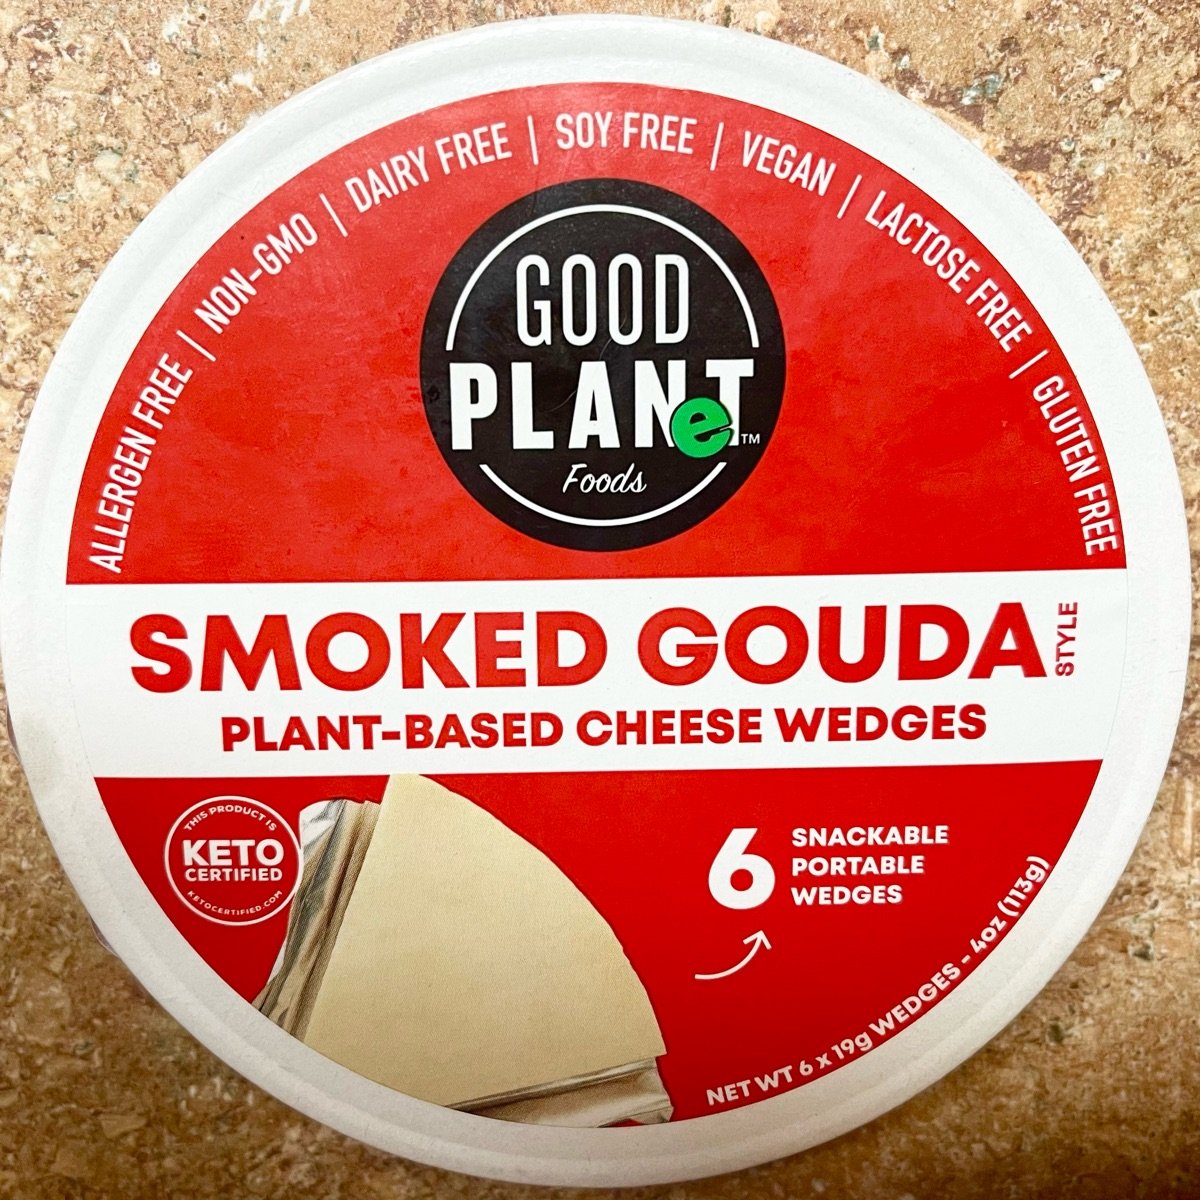 Smoked Gouda Snackable Wedges - GOOD PLANeT Foods